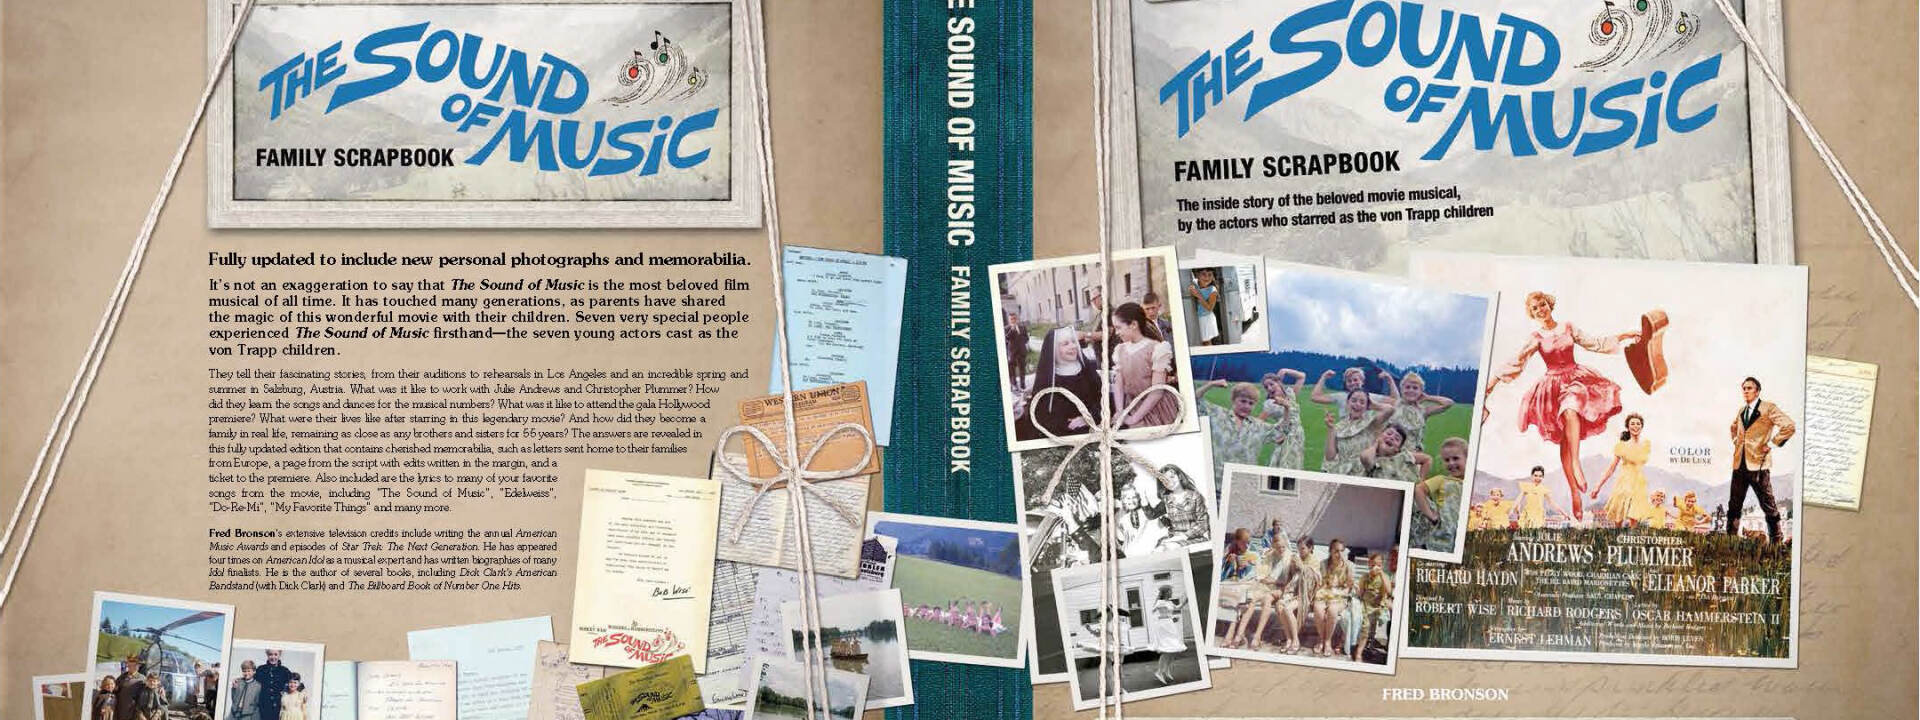 The Sound of Music Family Scrapbook 55th anniversary edition